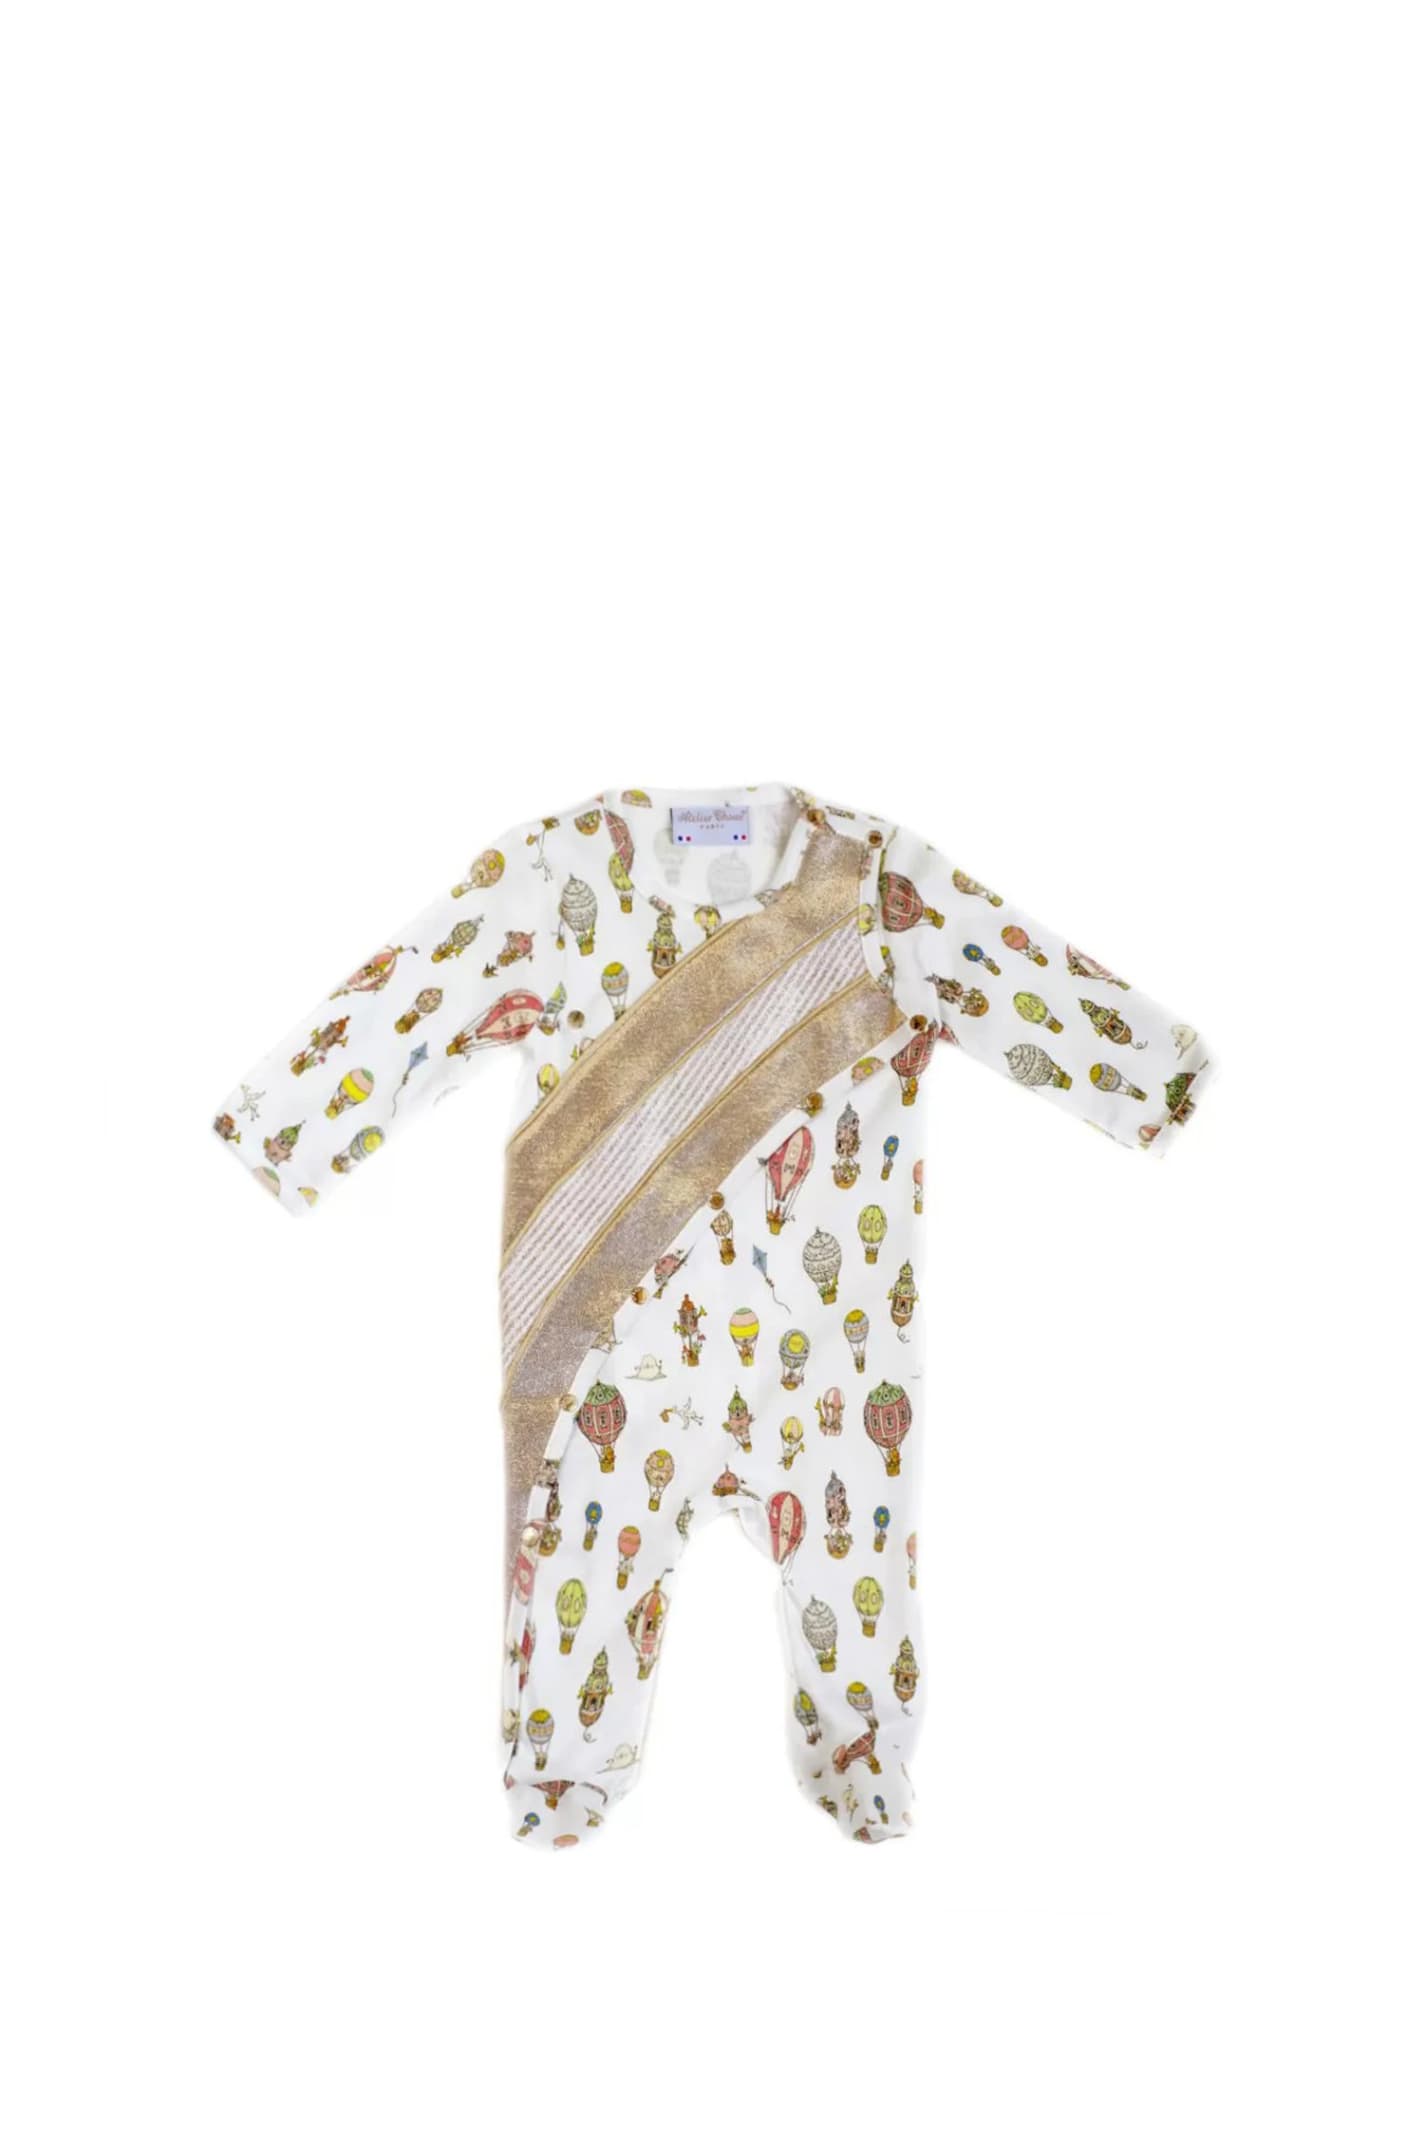 Atelier Choux Babies' Gold Playsuit Hot Air Balloon In Multicolor